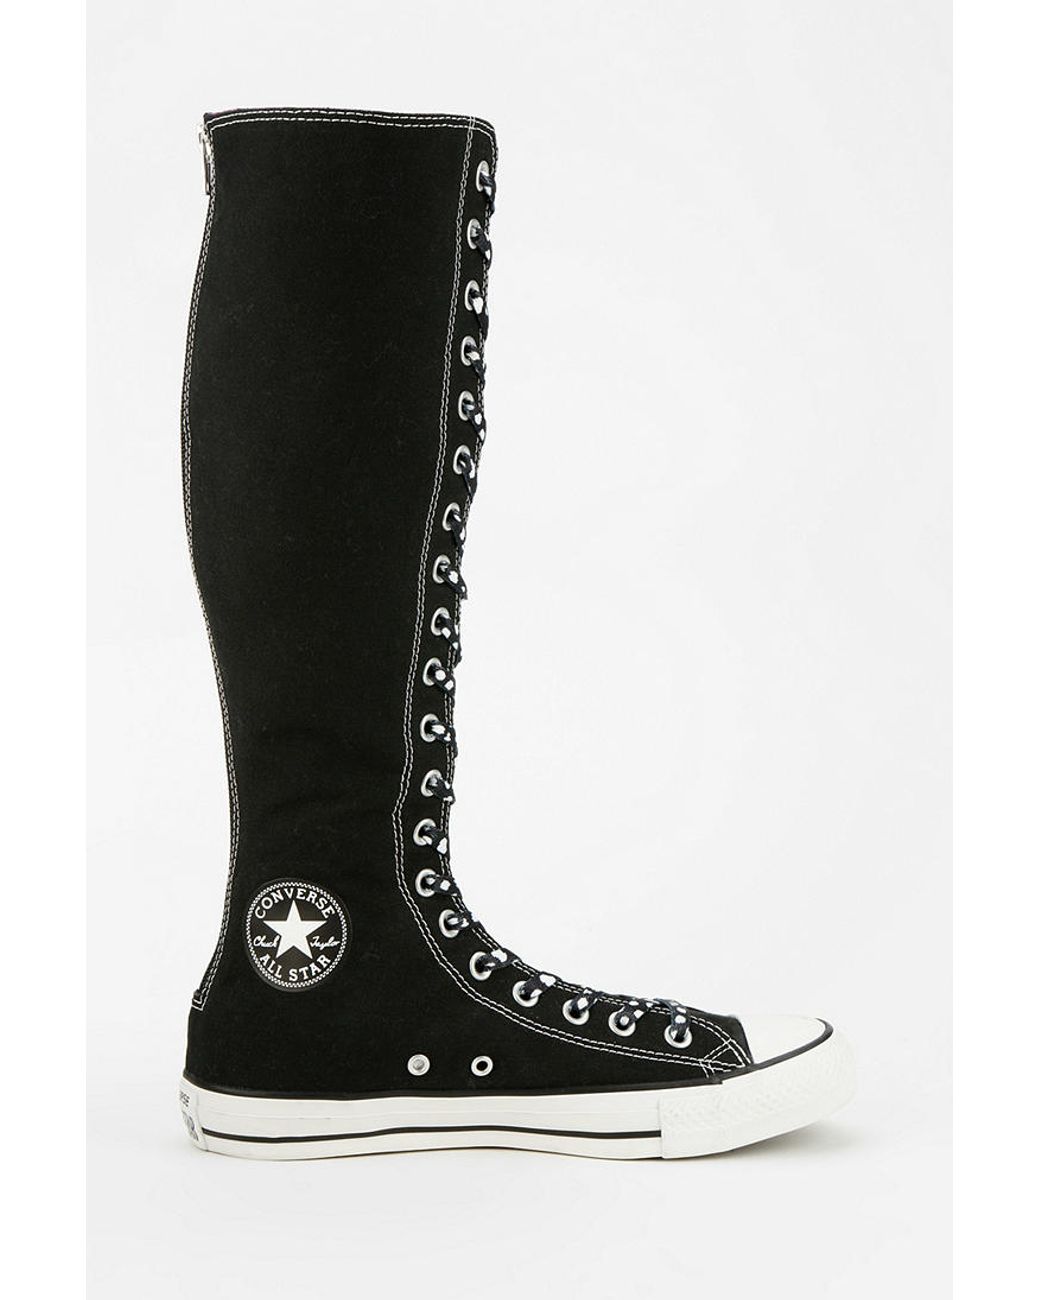 Top 40+ images converse calf high boots - In.thptnganamst.edu.vn